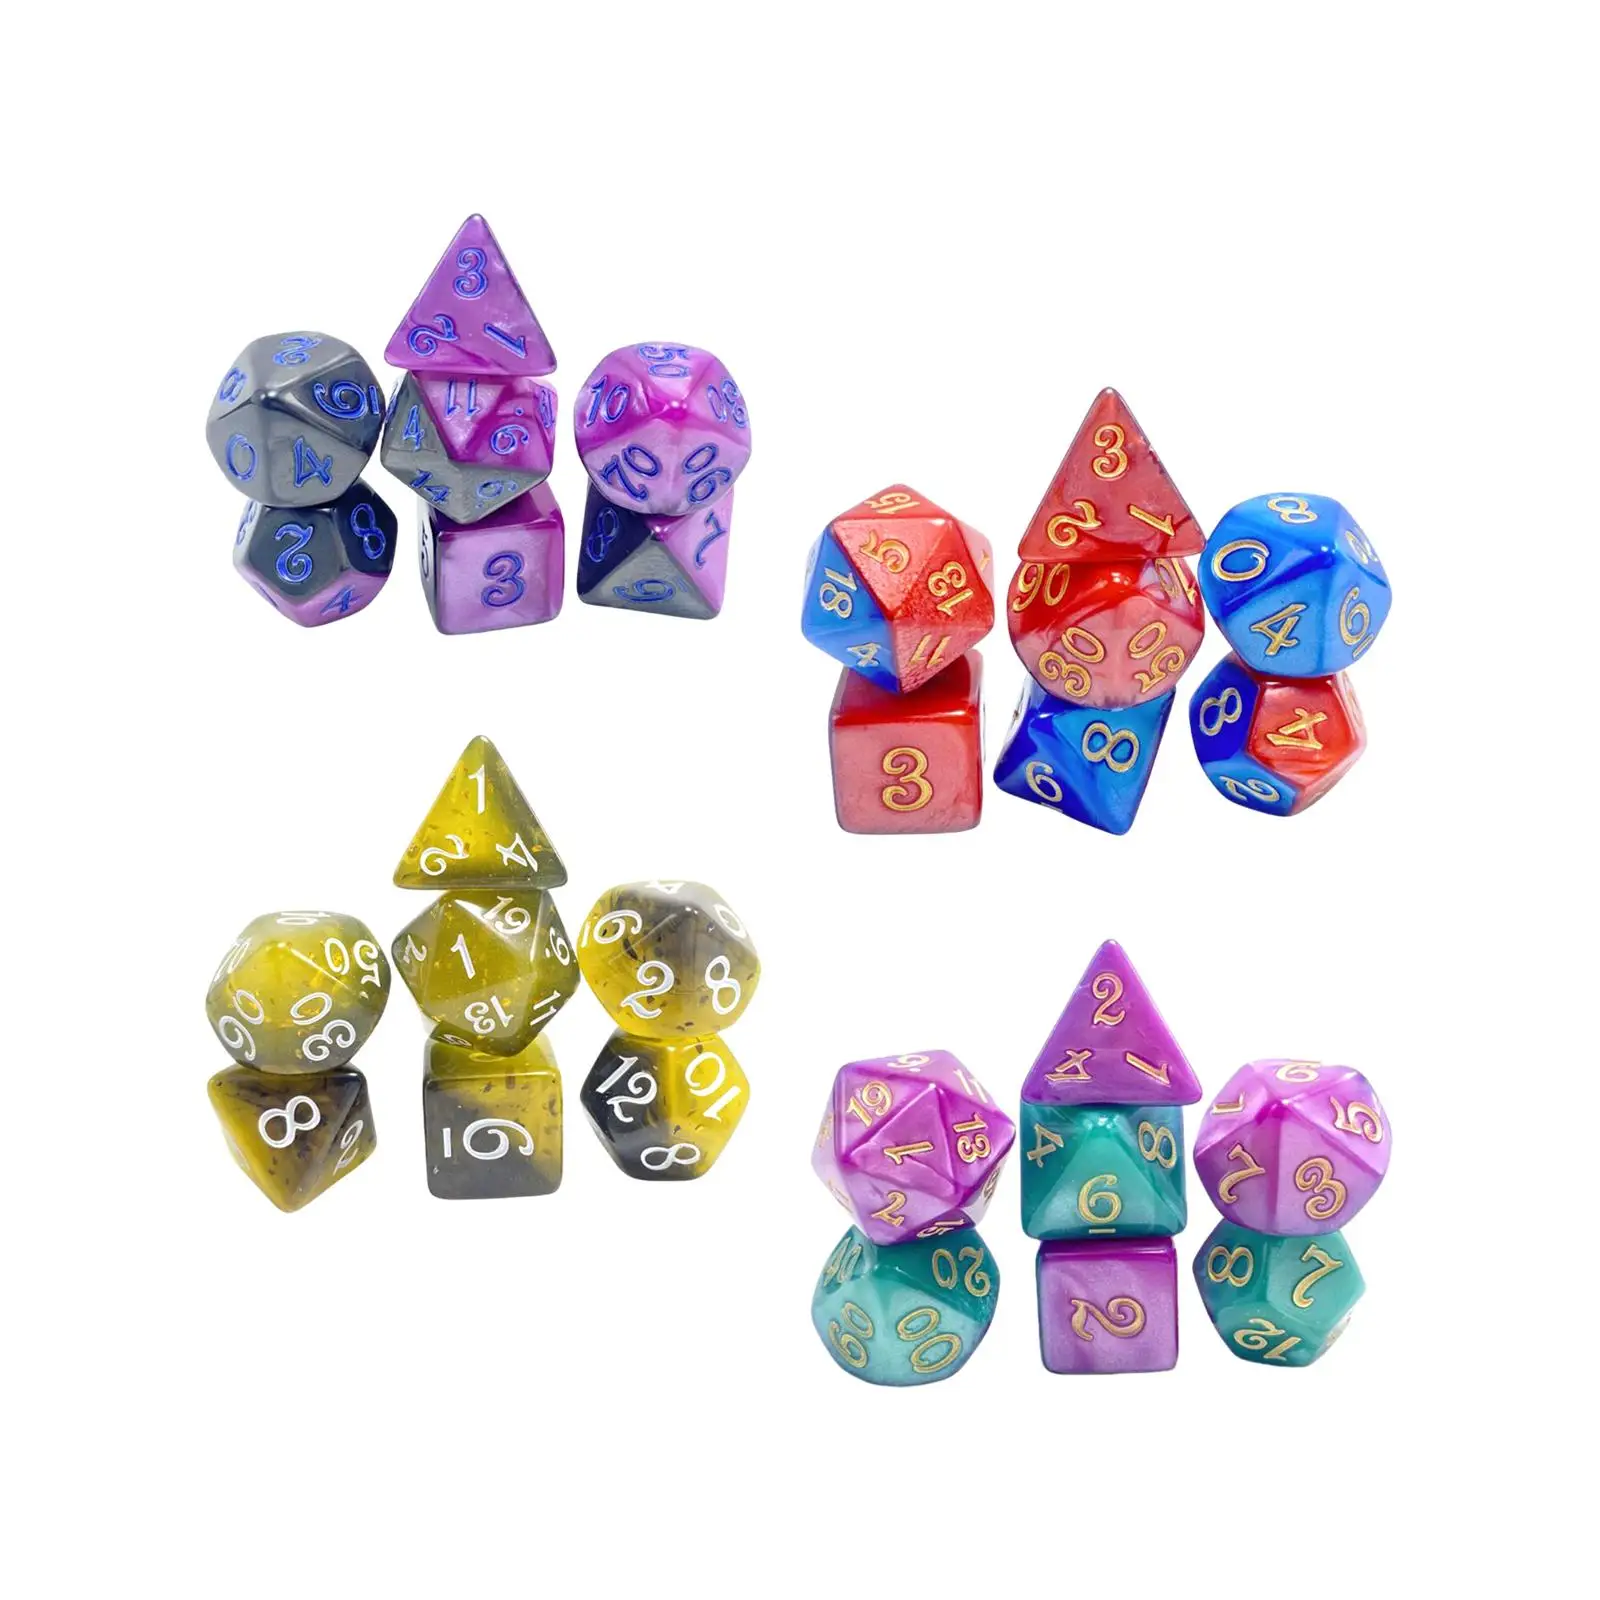 7x Polyhedral Dice Acrylic Vivid Colors Table Gaming Dice for Board Game Role